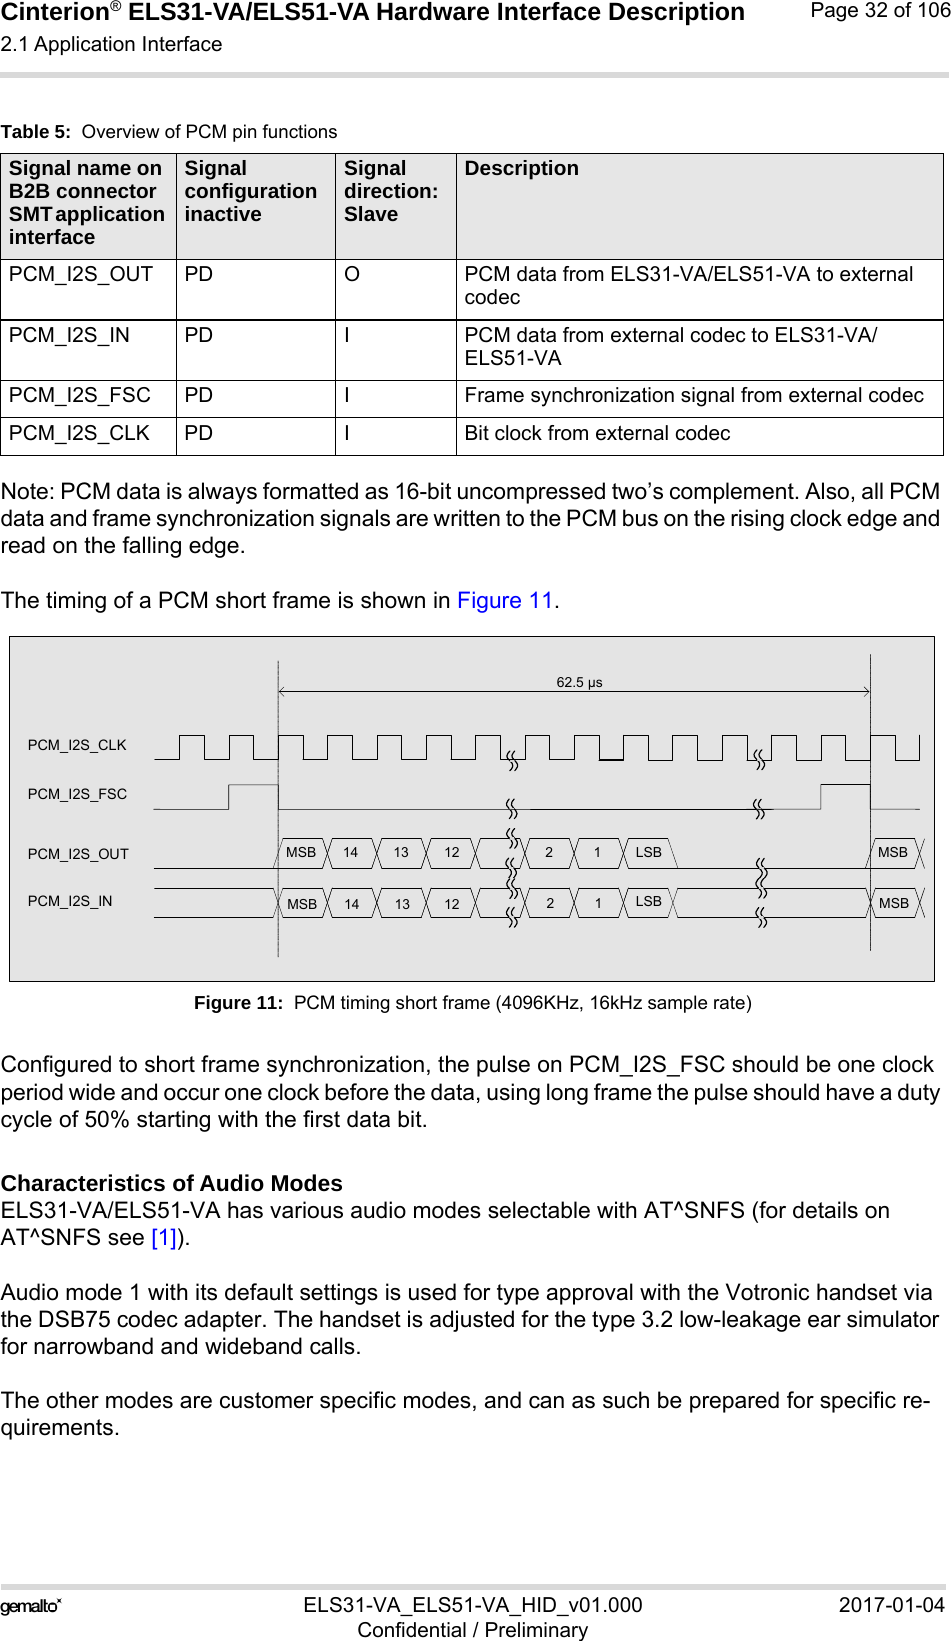 Cinterion® ELS31-VA/ELS51-VA Hardware Interface Description2.1 Application Interface56ELS31-VA_ELS51-VA_HID_v01.000 2017-01-04Confidential / PreliminaryPage 32 of 106Note: PCM data is always formatted as 16-bit uncompressed two’s complement. Also, all PCM data and frame synchronization signals are written to the PCM bus on the rising clock edge and read on the falling edge.The timing of a PCM short frame is shown in Figure 11.Figure 11:  PCM timing short frame (4096KHz, 16kHz sample rate)Configured to short frame synchronization, the pulse on PCM_I2S_FSC should be one clock period wide and occur one clock before the data, using long frame the pulse should have a duty cycle of 50% starting with the first data bit. Characteristics of Audio ModesELS31-VA/ELS51-VA has various audio modes selectable with AT^SNFS (for details on AT^SNFS see [1]).Audio mode 1 with its default settings is used for type approval with the Votronic handset via the DSB75 codec adapter. The handset is adjusted for the type 3.2 low-leakage ear simulator for narrowband and wideband calls. The other modes are customer specific modes, and can as such be prepared for specific re-quirements. Table 5:  Overview of PCM pin functionsSignal name on B2B connectorSMT application interfaceSignal configuration inactiveSignal direction: SlaveDescriptionPCM_I2S_OUT PD O PCM data from ELS31-VA/ELS51-VA to external codecPCM_I2S_IN  PD I PCM data from external codec to ELS31-VA/ELS51-VA PCM_I2S_FSC  PD I Frame synchronization signal from external codecPCM_I2S_CLK  PD I Bit clock from external codecMSBMSBLSBLSB14 1314 1311121222MSBMSB62.5 µsPCM_I2S_CLKPCM_I2S_FSCPCM_I2S_OUTPCM_I2S_IN